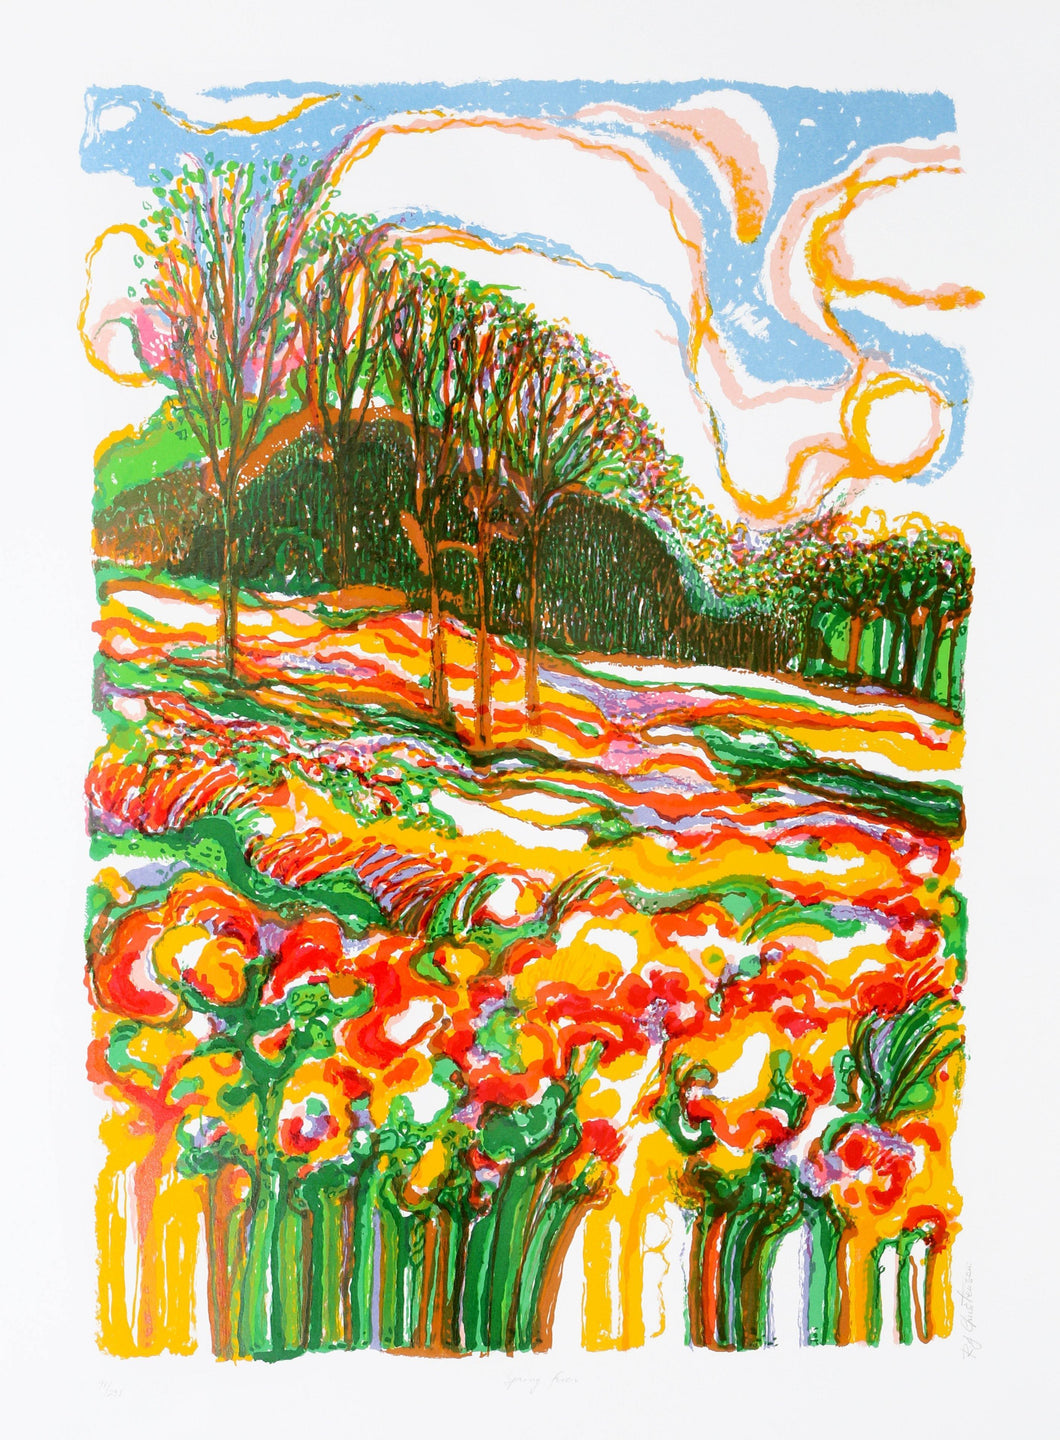 Spring Fever Lithograph | Ronald Julius Christensen,{{product.type}}